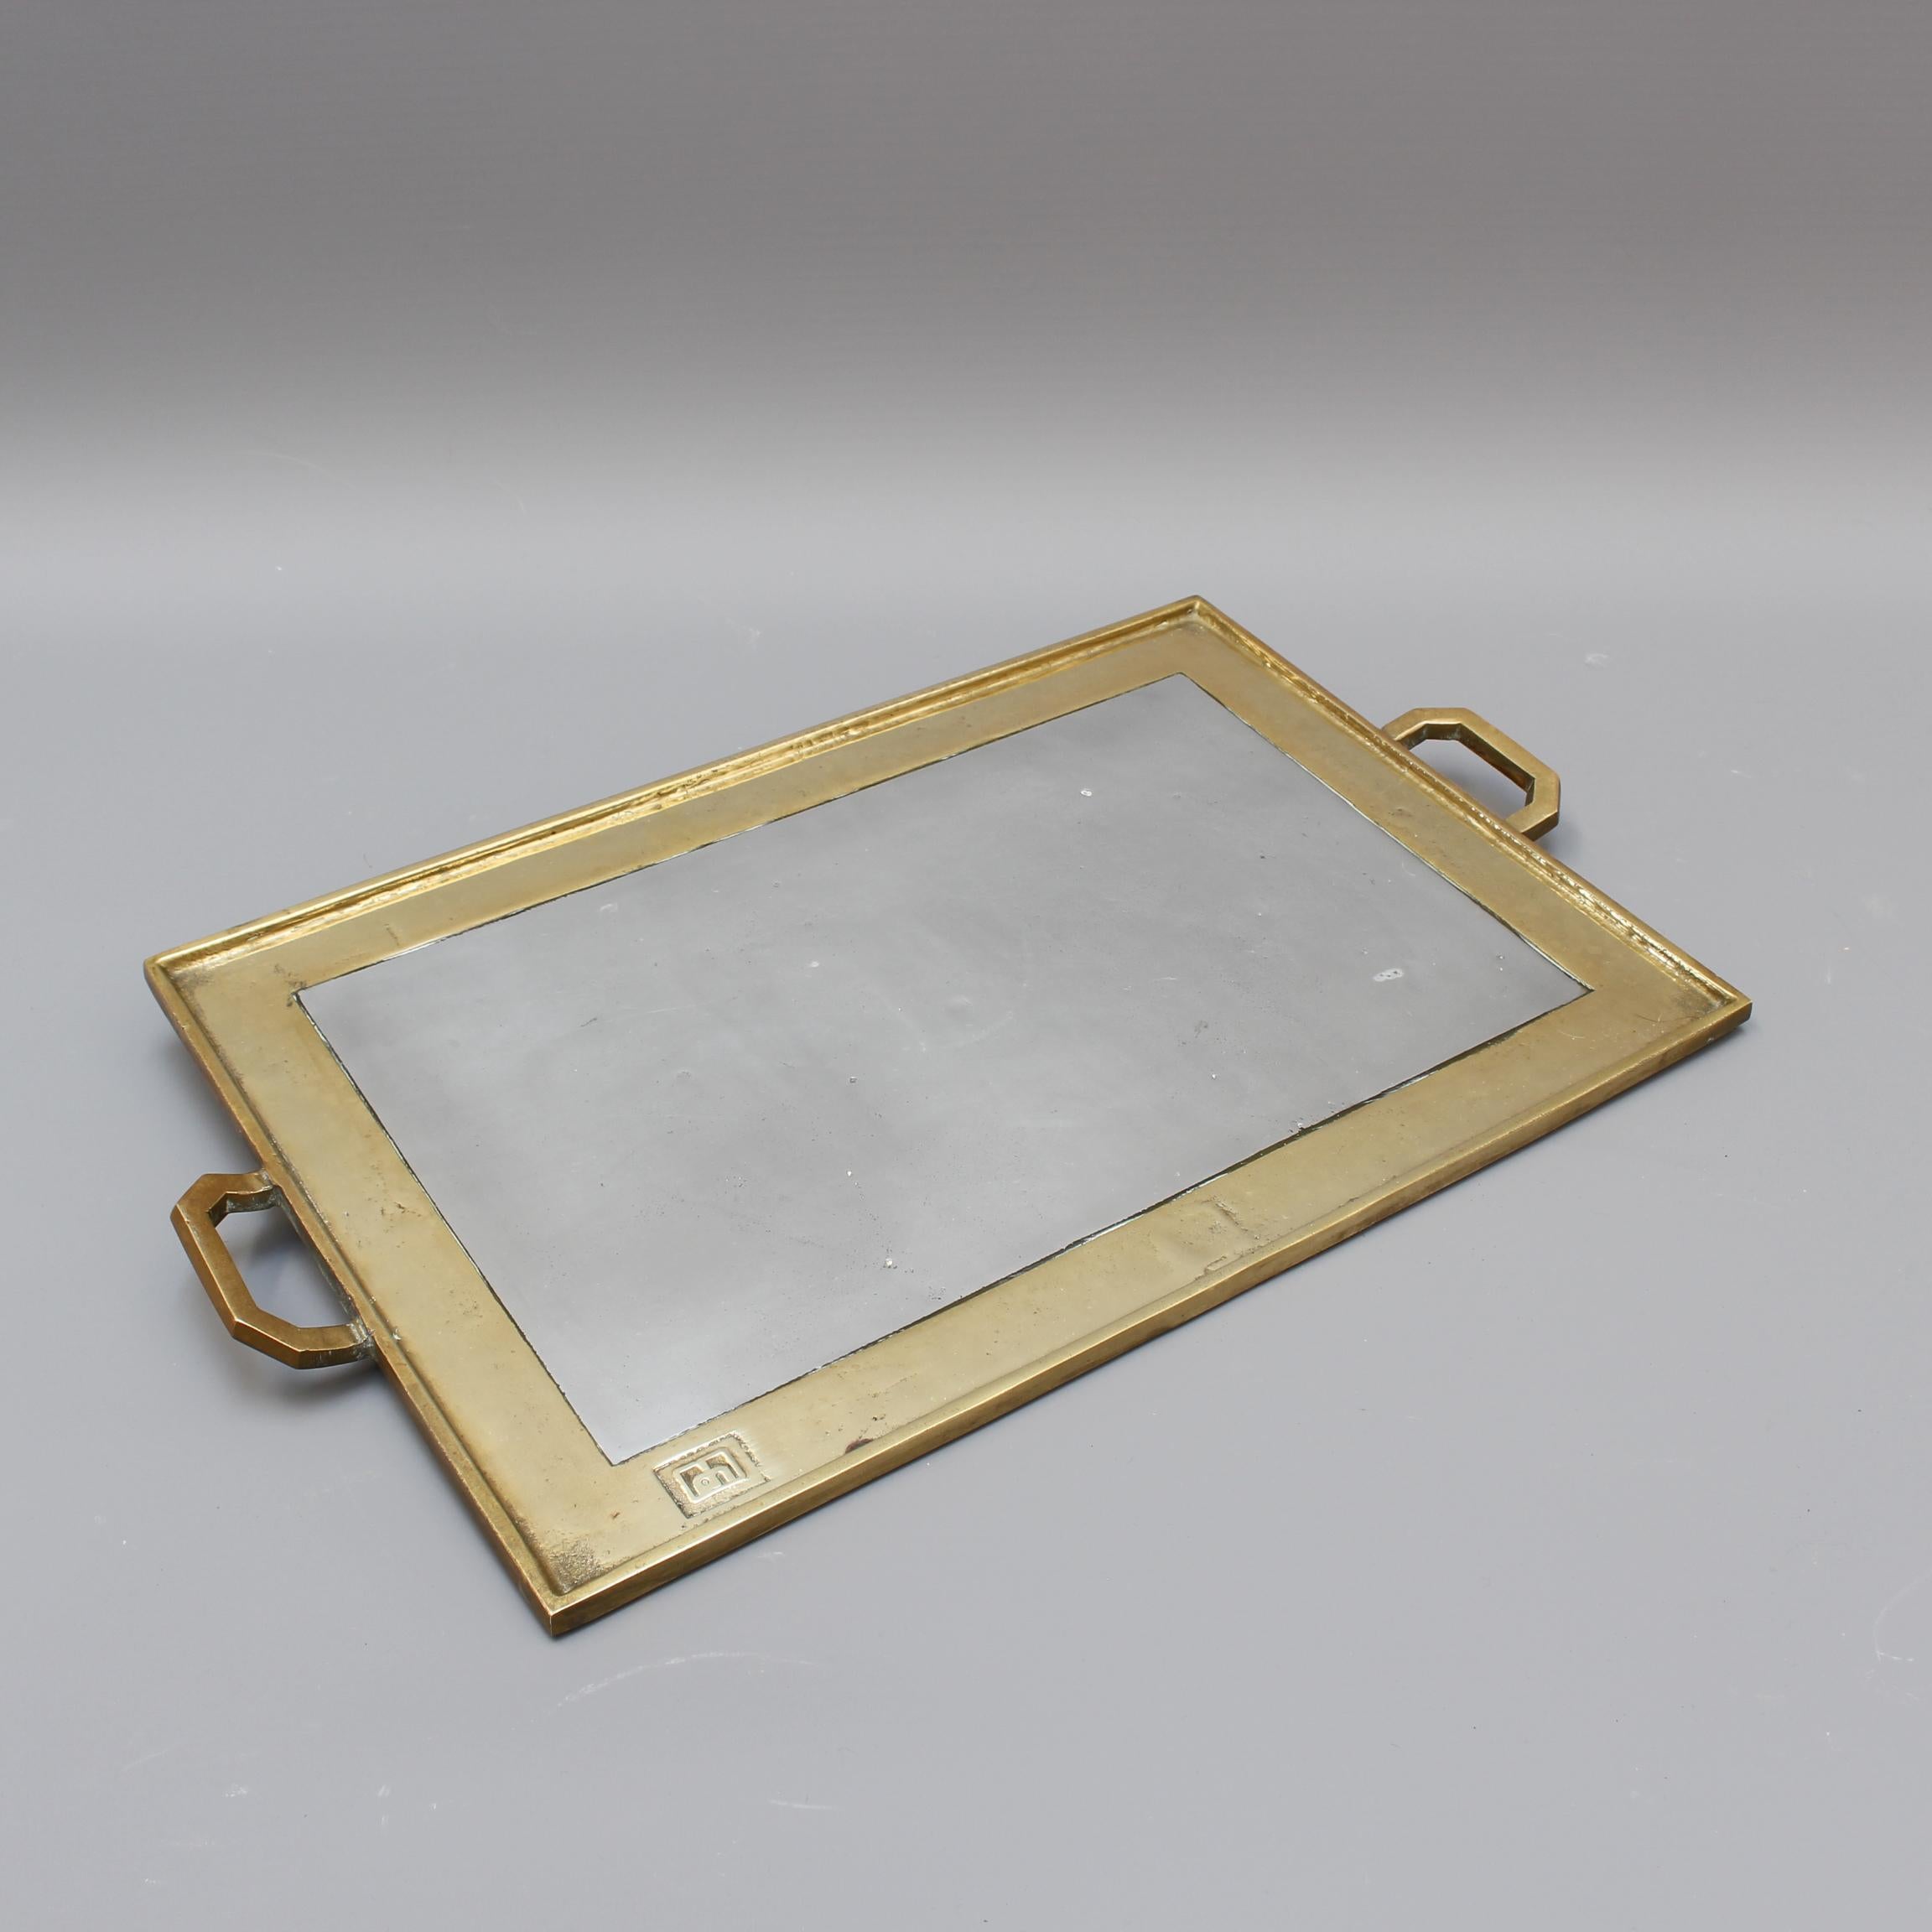 Spanish Aluminium and Brass Brutalist Style Serving Tray by David Marshall, circa 1970s